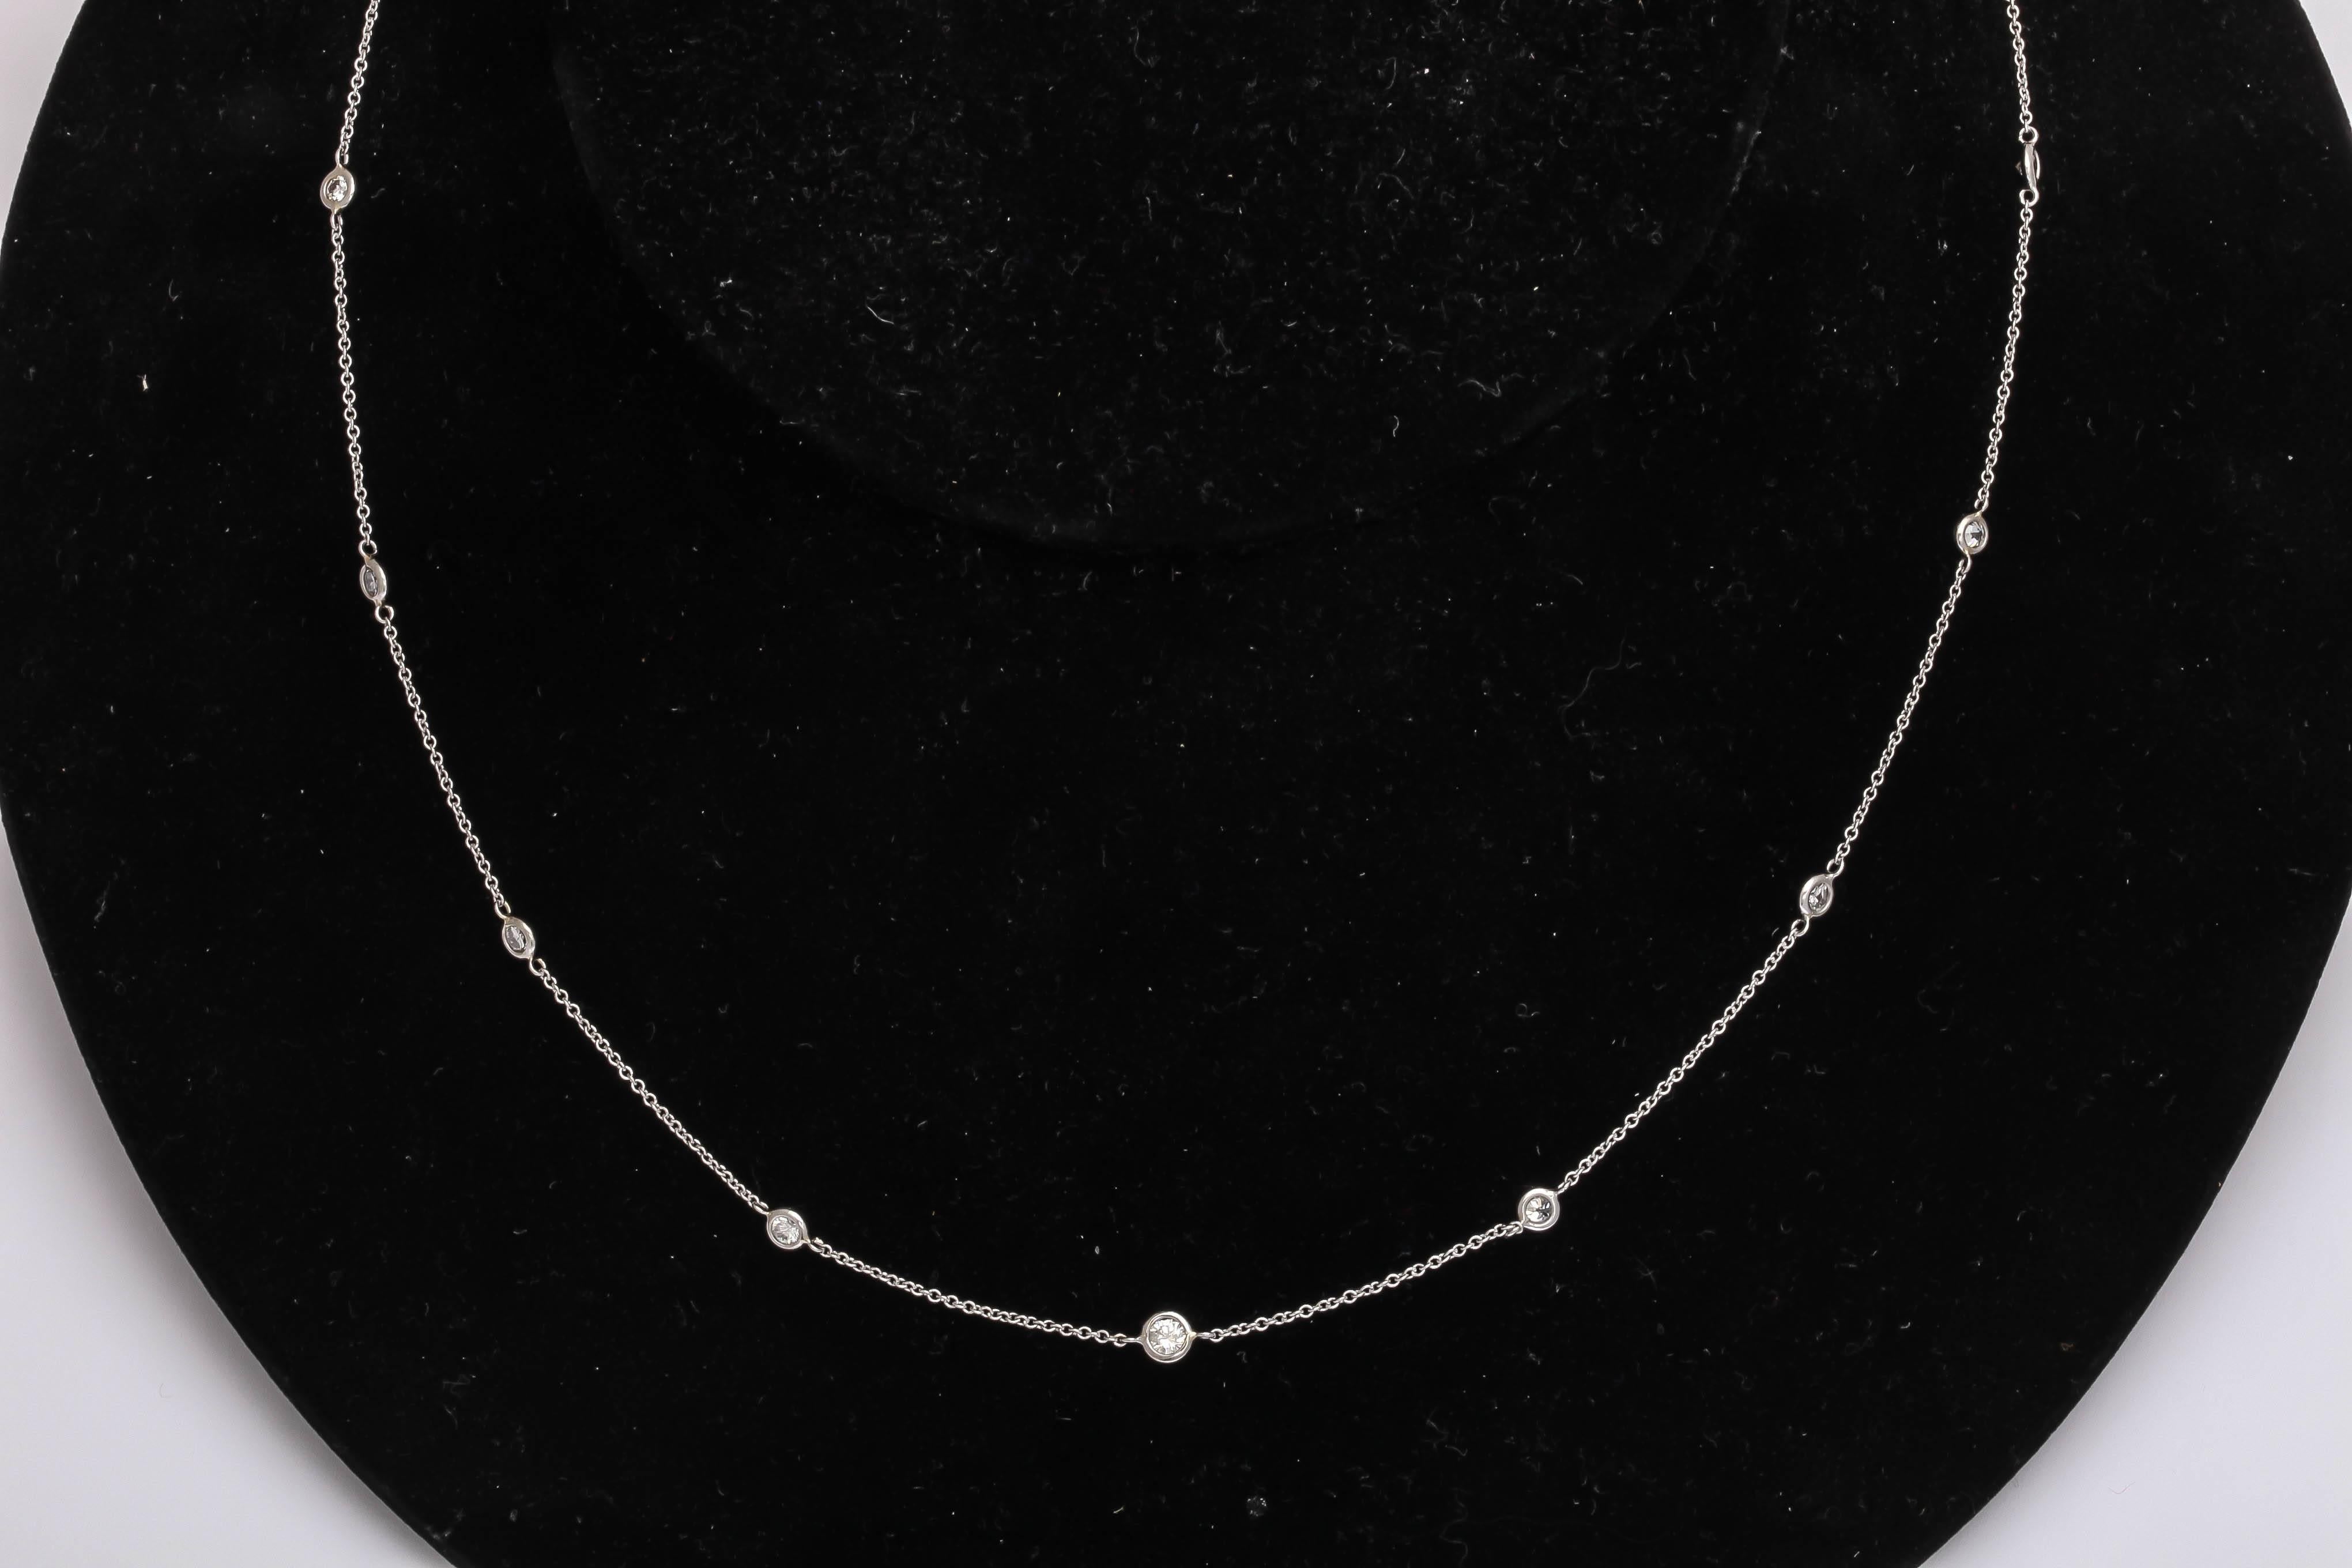 This necklace has 15 white diamonds , bezel set, in a platinum chain measuring about 19.5 in. total. It can be lengthened or shortened. Great for casual wear by itself or worn with a pendant.